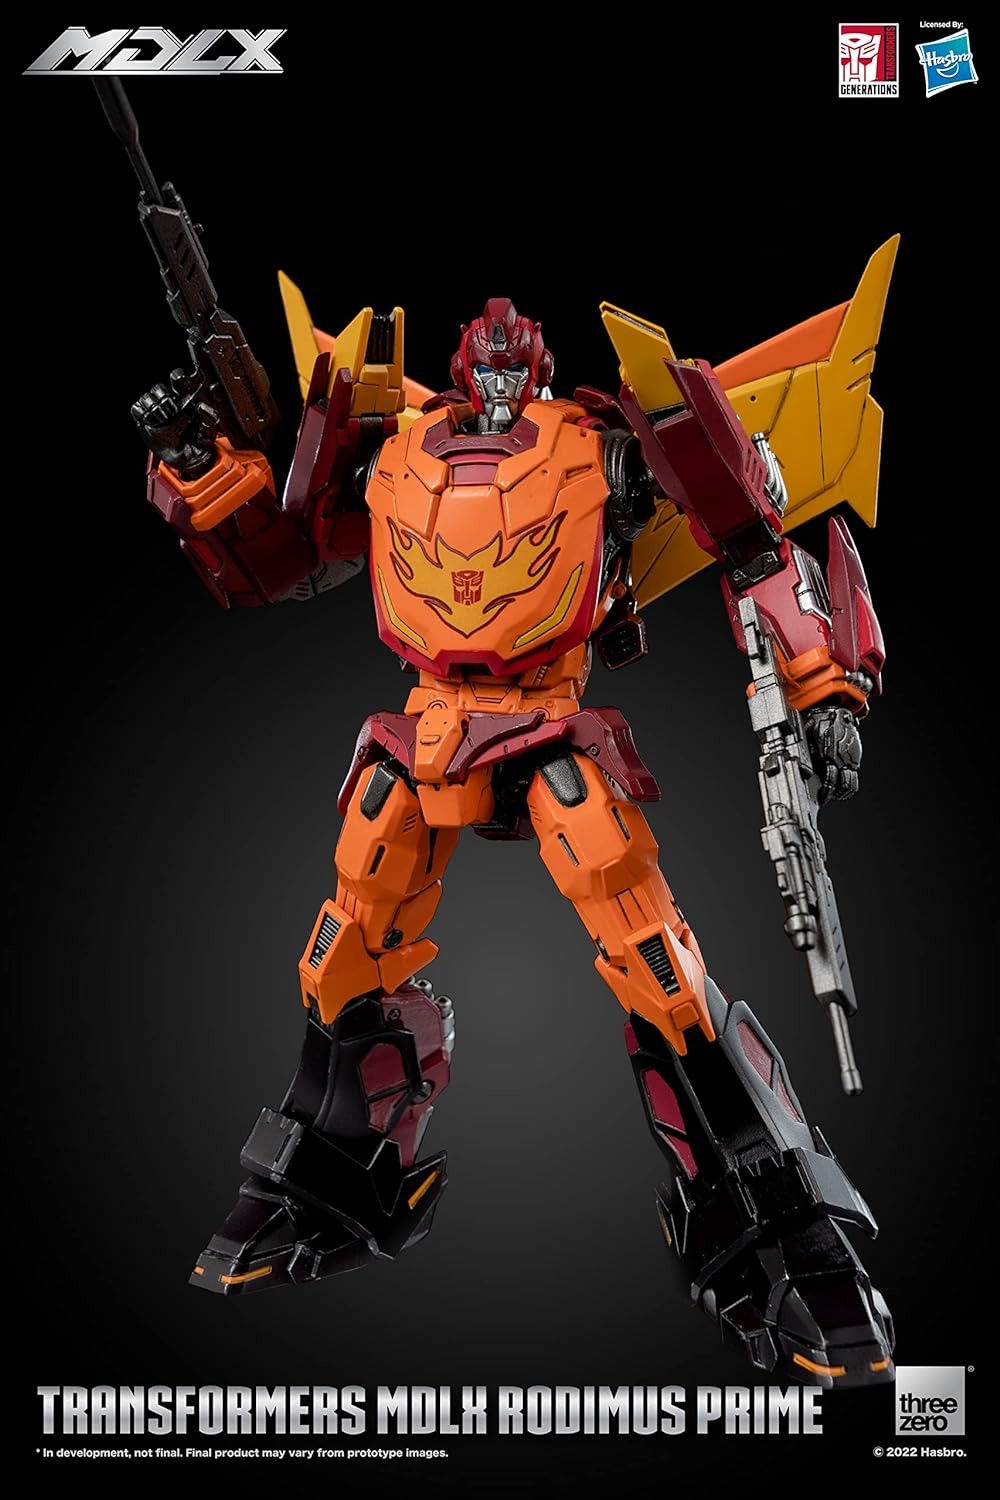 Transformers Mdlx Rodimus Prime Articulated Fig